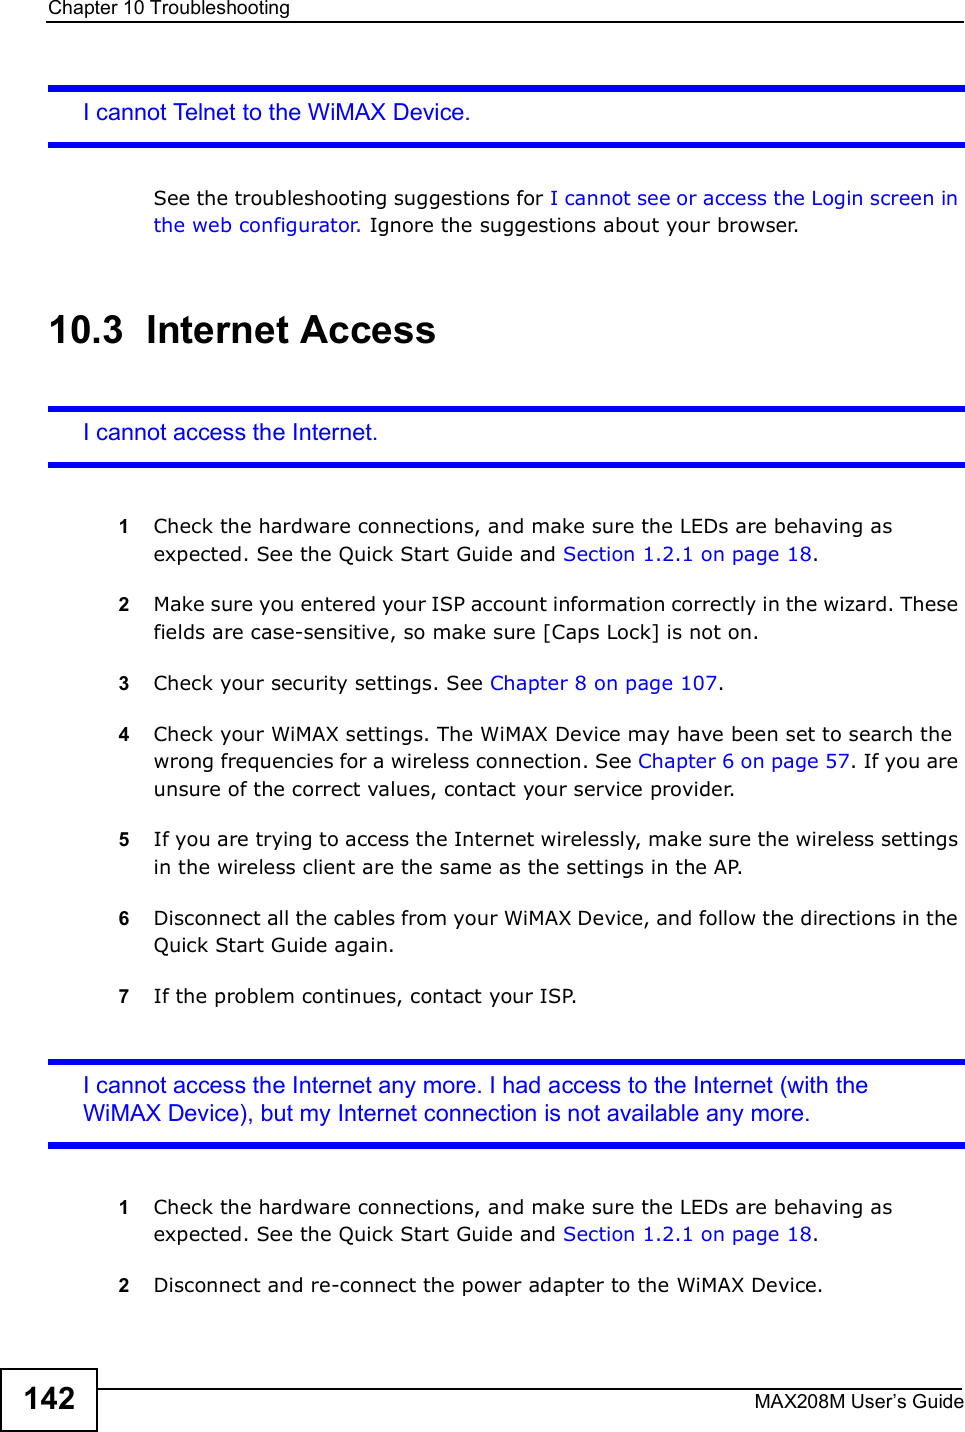 Chapter 10TroubleshootingMAX208M User s Guide142I cannot Telnet to the WiMAX Device.See the troubleshooting suggestions for I cannot see or access the Login screen in the web configurator.  Ignore the suggestions about your browser.10.3  Internet AccessI cannot access the Internet.1Check the hardware connections, and make sure the LEDs are behaving as expected. See the Quick Start Guide and Section 1.2.1 on page 18.2Make sure you entered your ISP account information correctly in the wizard. These fields are case-sensitive, so make sure [Caps Lock] is not on.3Check your security settings. See Chapter 8 on page 107.4Check your WiMAX settings. The WiMAX Device may have been set to search the wrong frequencies for a wireless connection. See Chapter 6 on page 57. If you are unsure of the correct values, contact your service provider.5If you are trying to access the Internet wirelessly, make sure the wireless settings in the wireless client are the same as the settings in the AP.6Disconnect all the cables from your WiMAX Device, and follow the directions in the Quick Start Guide again.7If the problem continues, contact your ISP.I cannot access the Internet any more. I had access to the Internet (with the WiMAX Device), but my Internet connection is not available any more.1Check the hardware connections, and make sure the LEDs are behaving as expected. See the Quick Start Guide and Section 1.2.1 on page 18.2Disconnect and re-connect the power adapter to the WiMAX Device. 